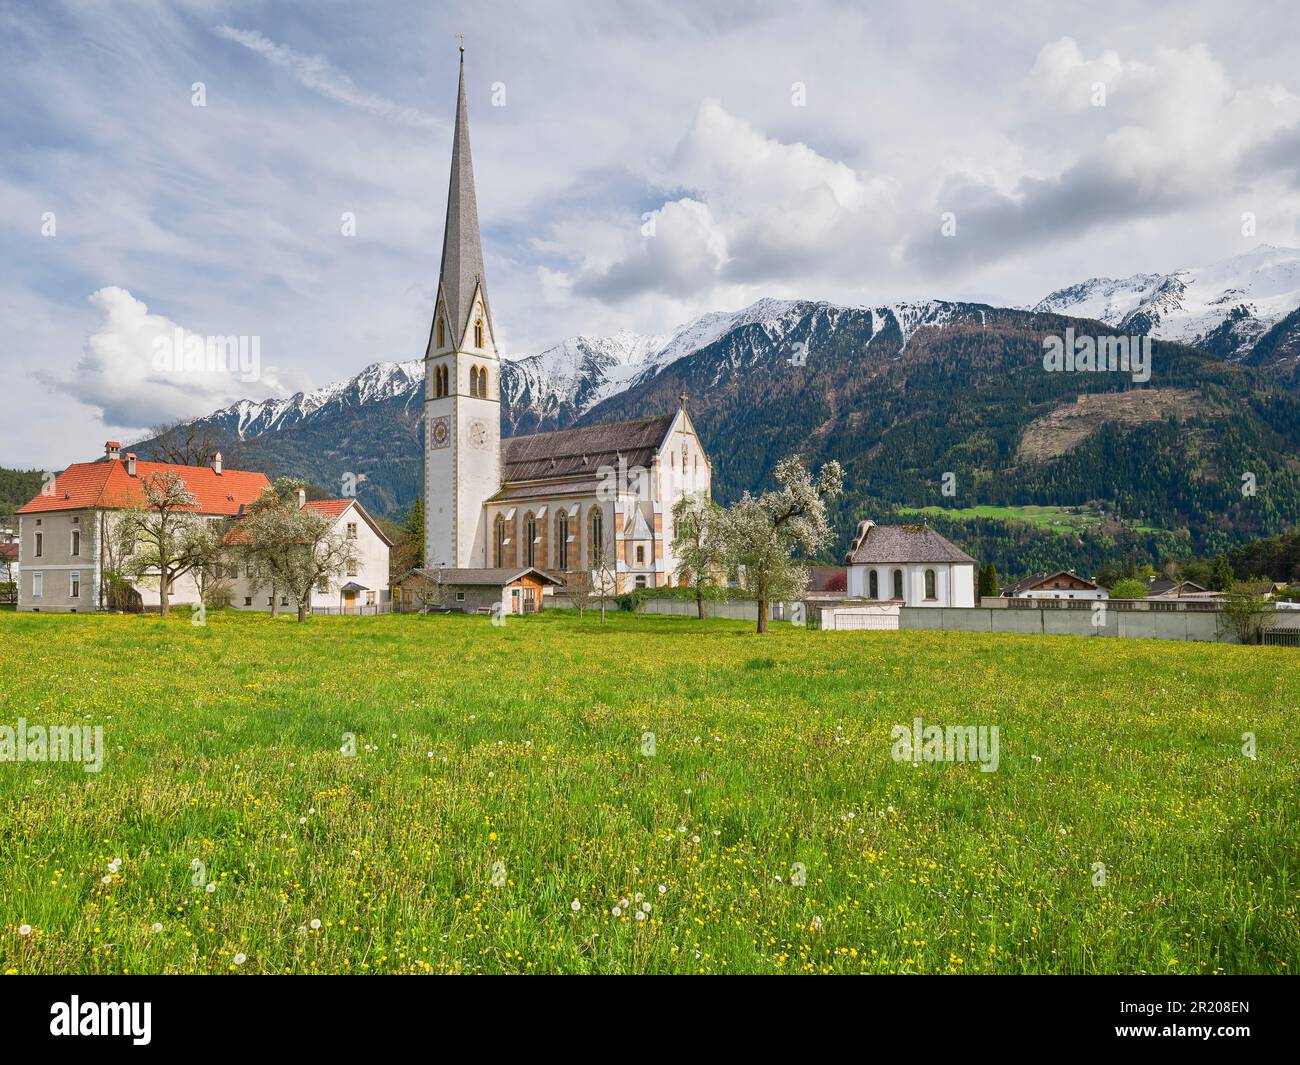 Parish church Untermieming in spring, Mieming, Mieminger Plateau, mountains with snow, Tyrol, Austria Stock Photo